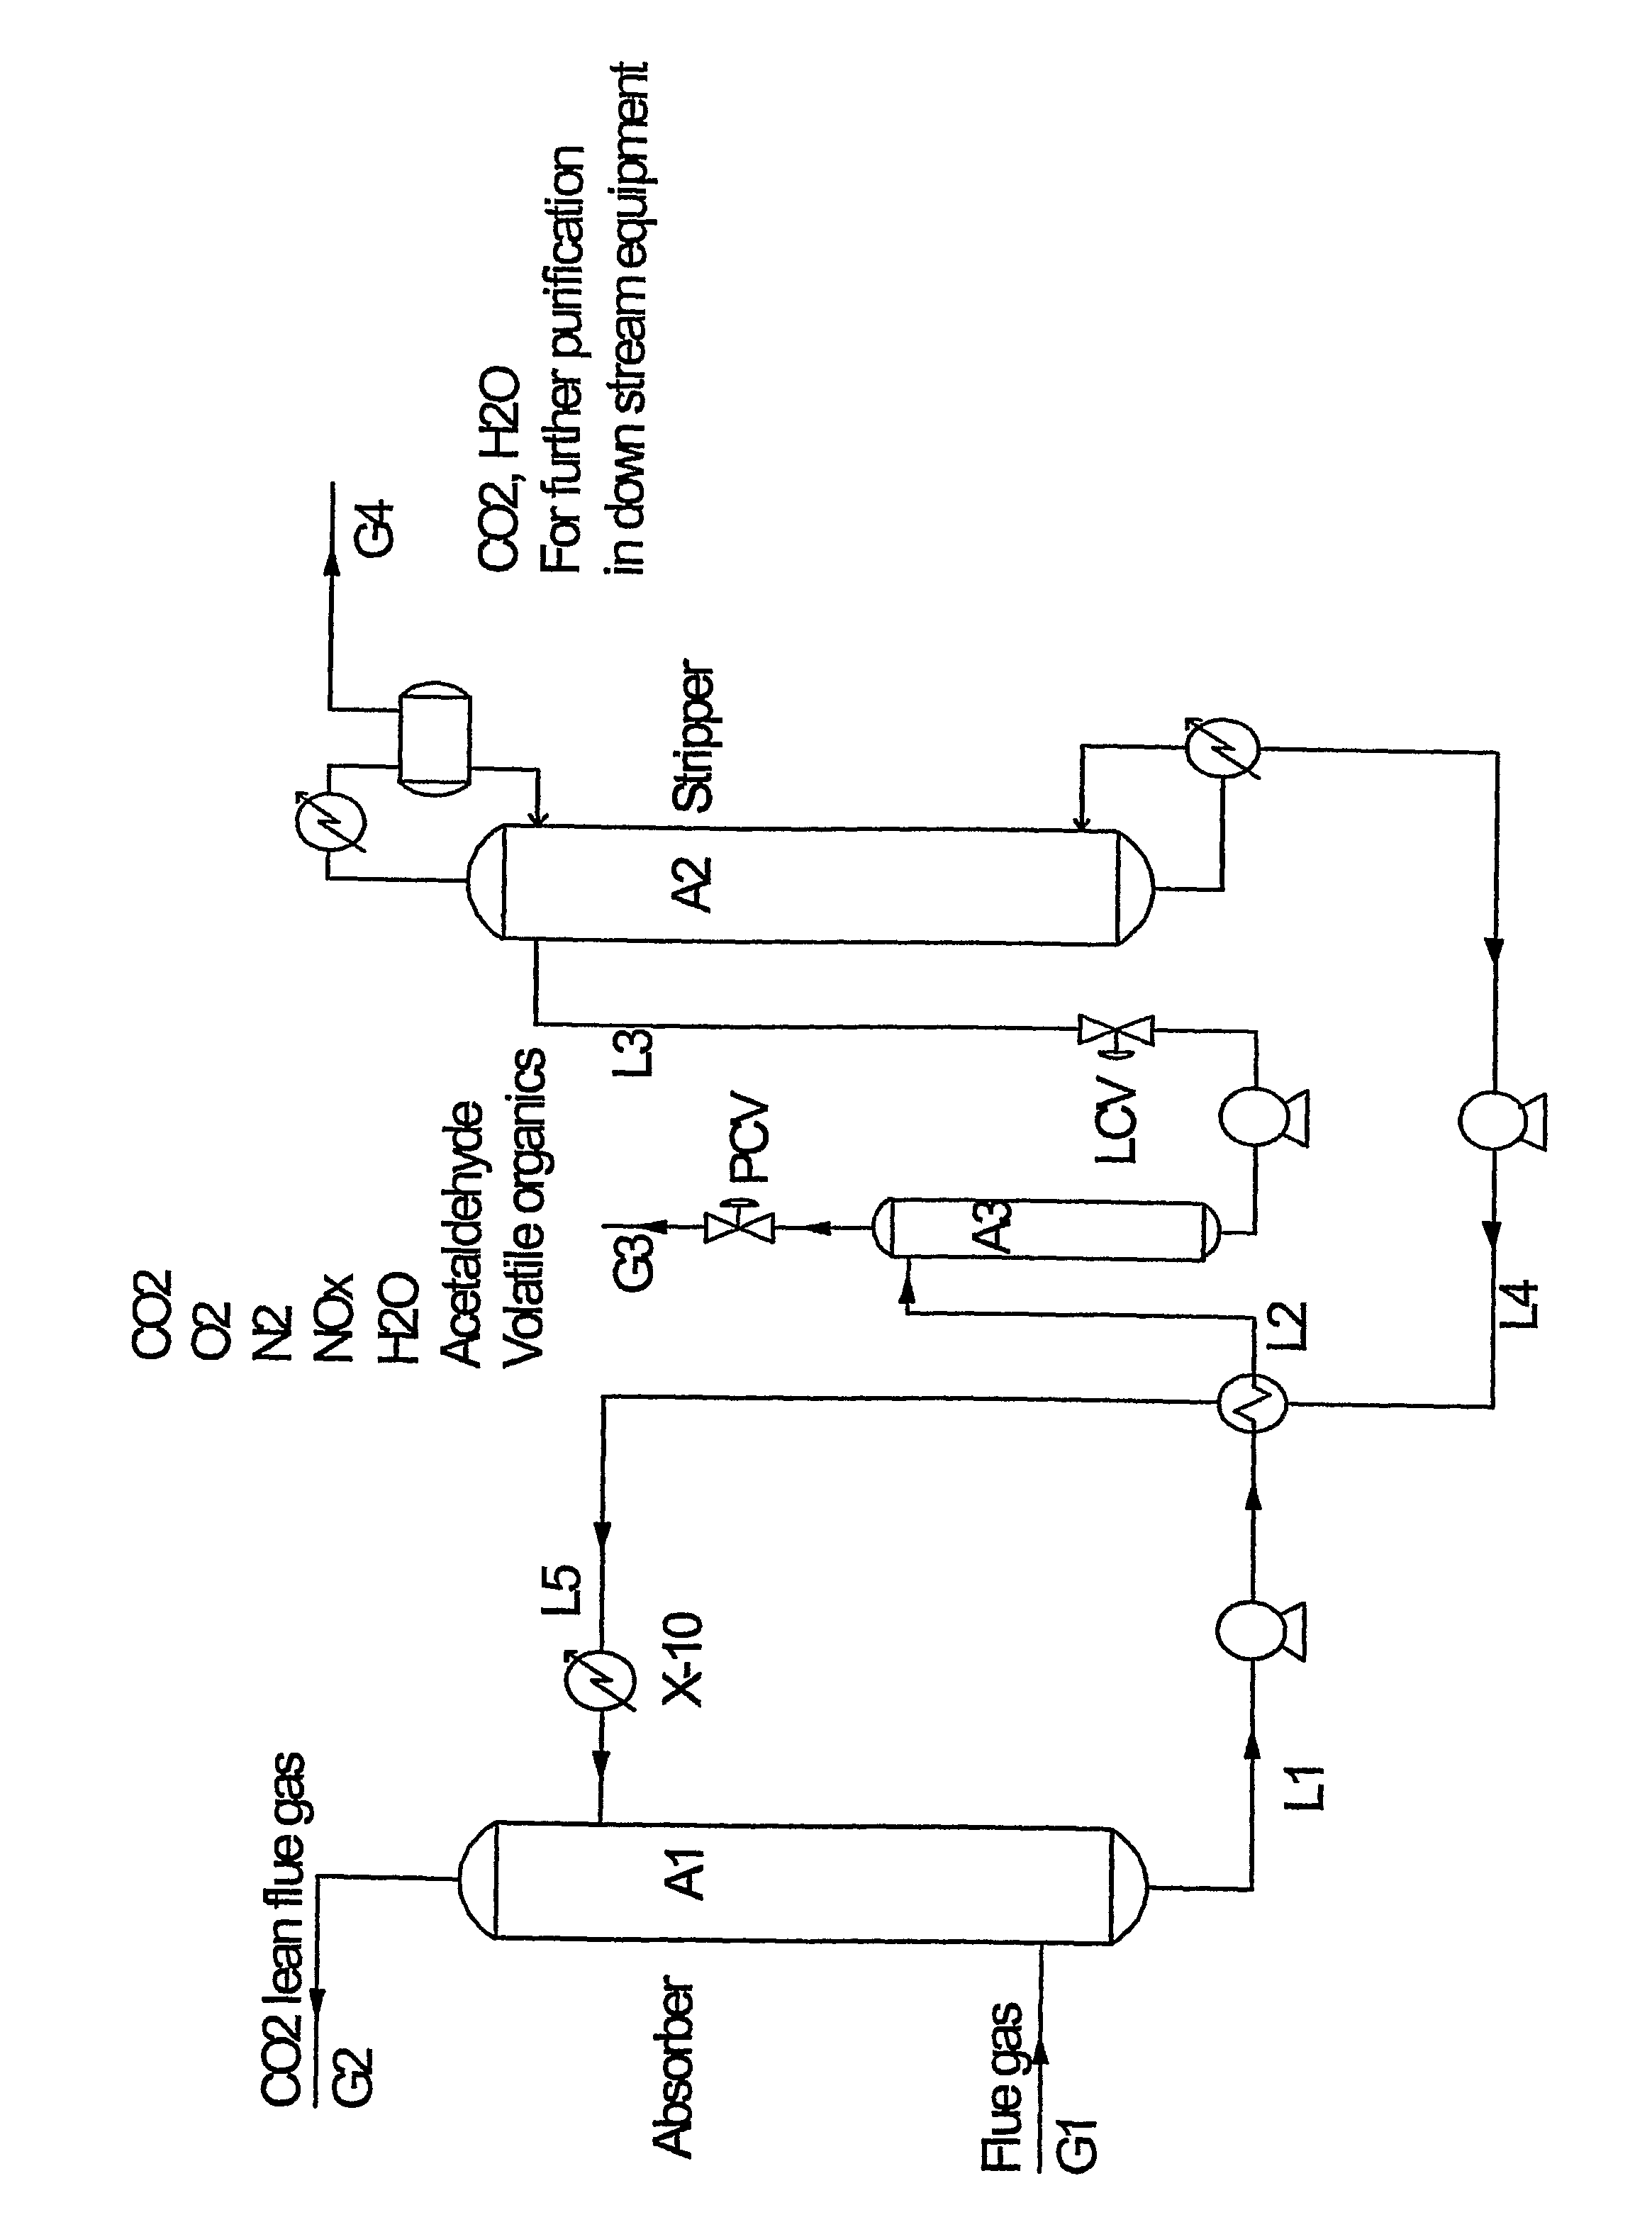 Method for recovery of high purity carbon dioxide from a gaseous source comprising nitrogen compounds